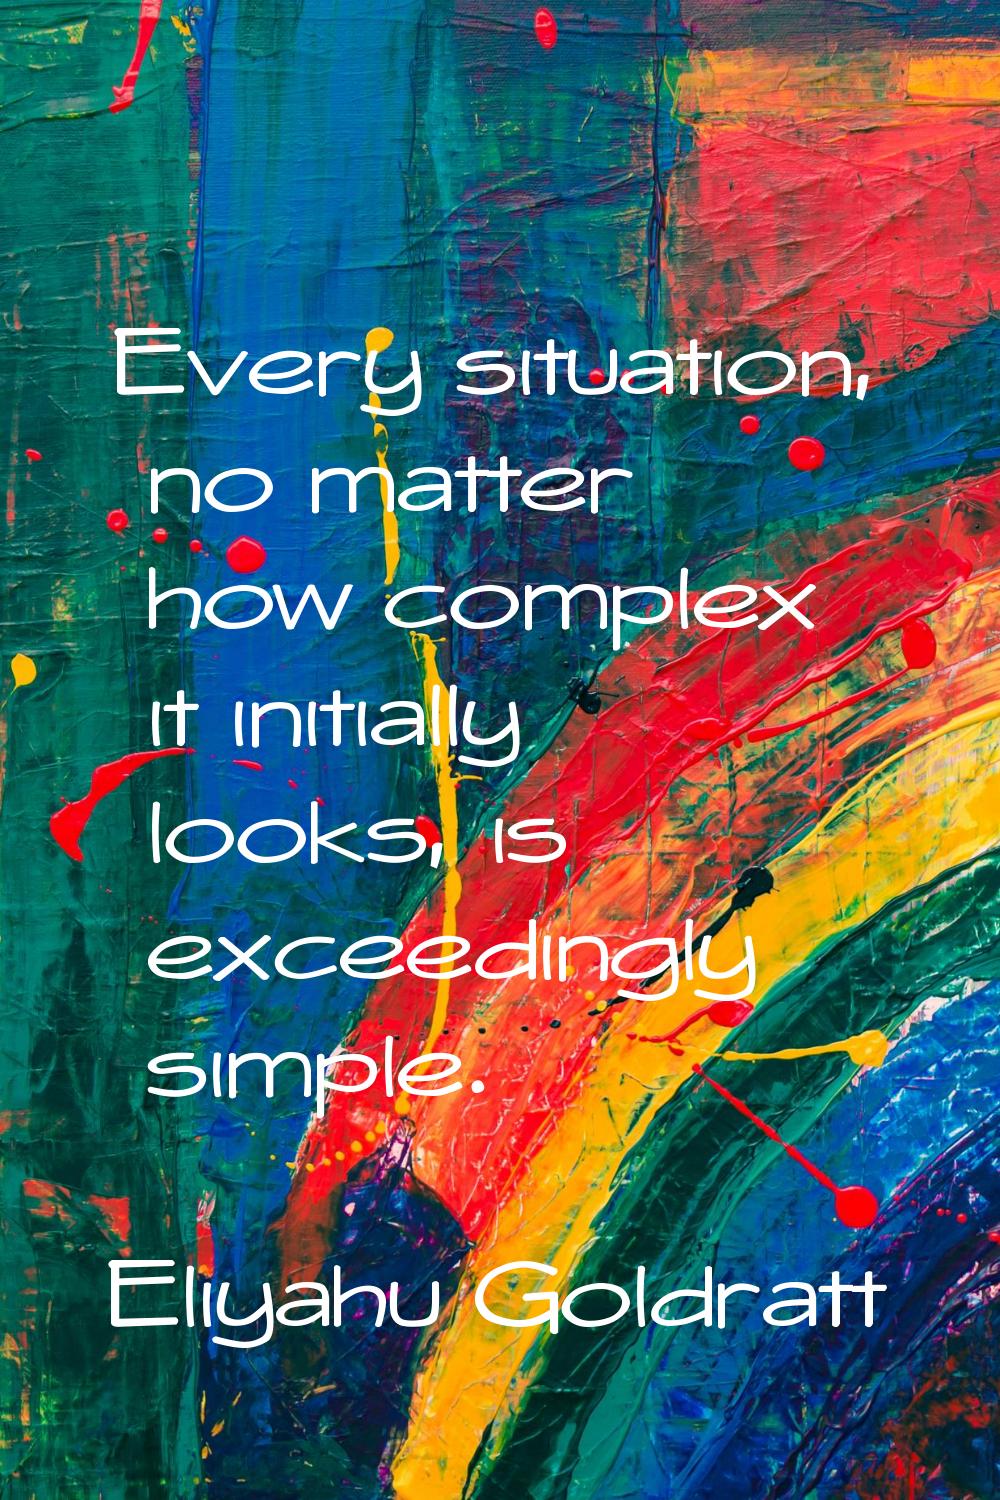 Every situation, no matter how complex it initially looks, is exceedingly simple.